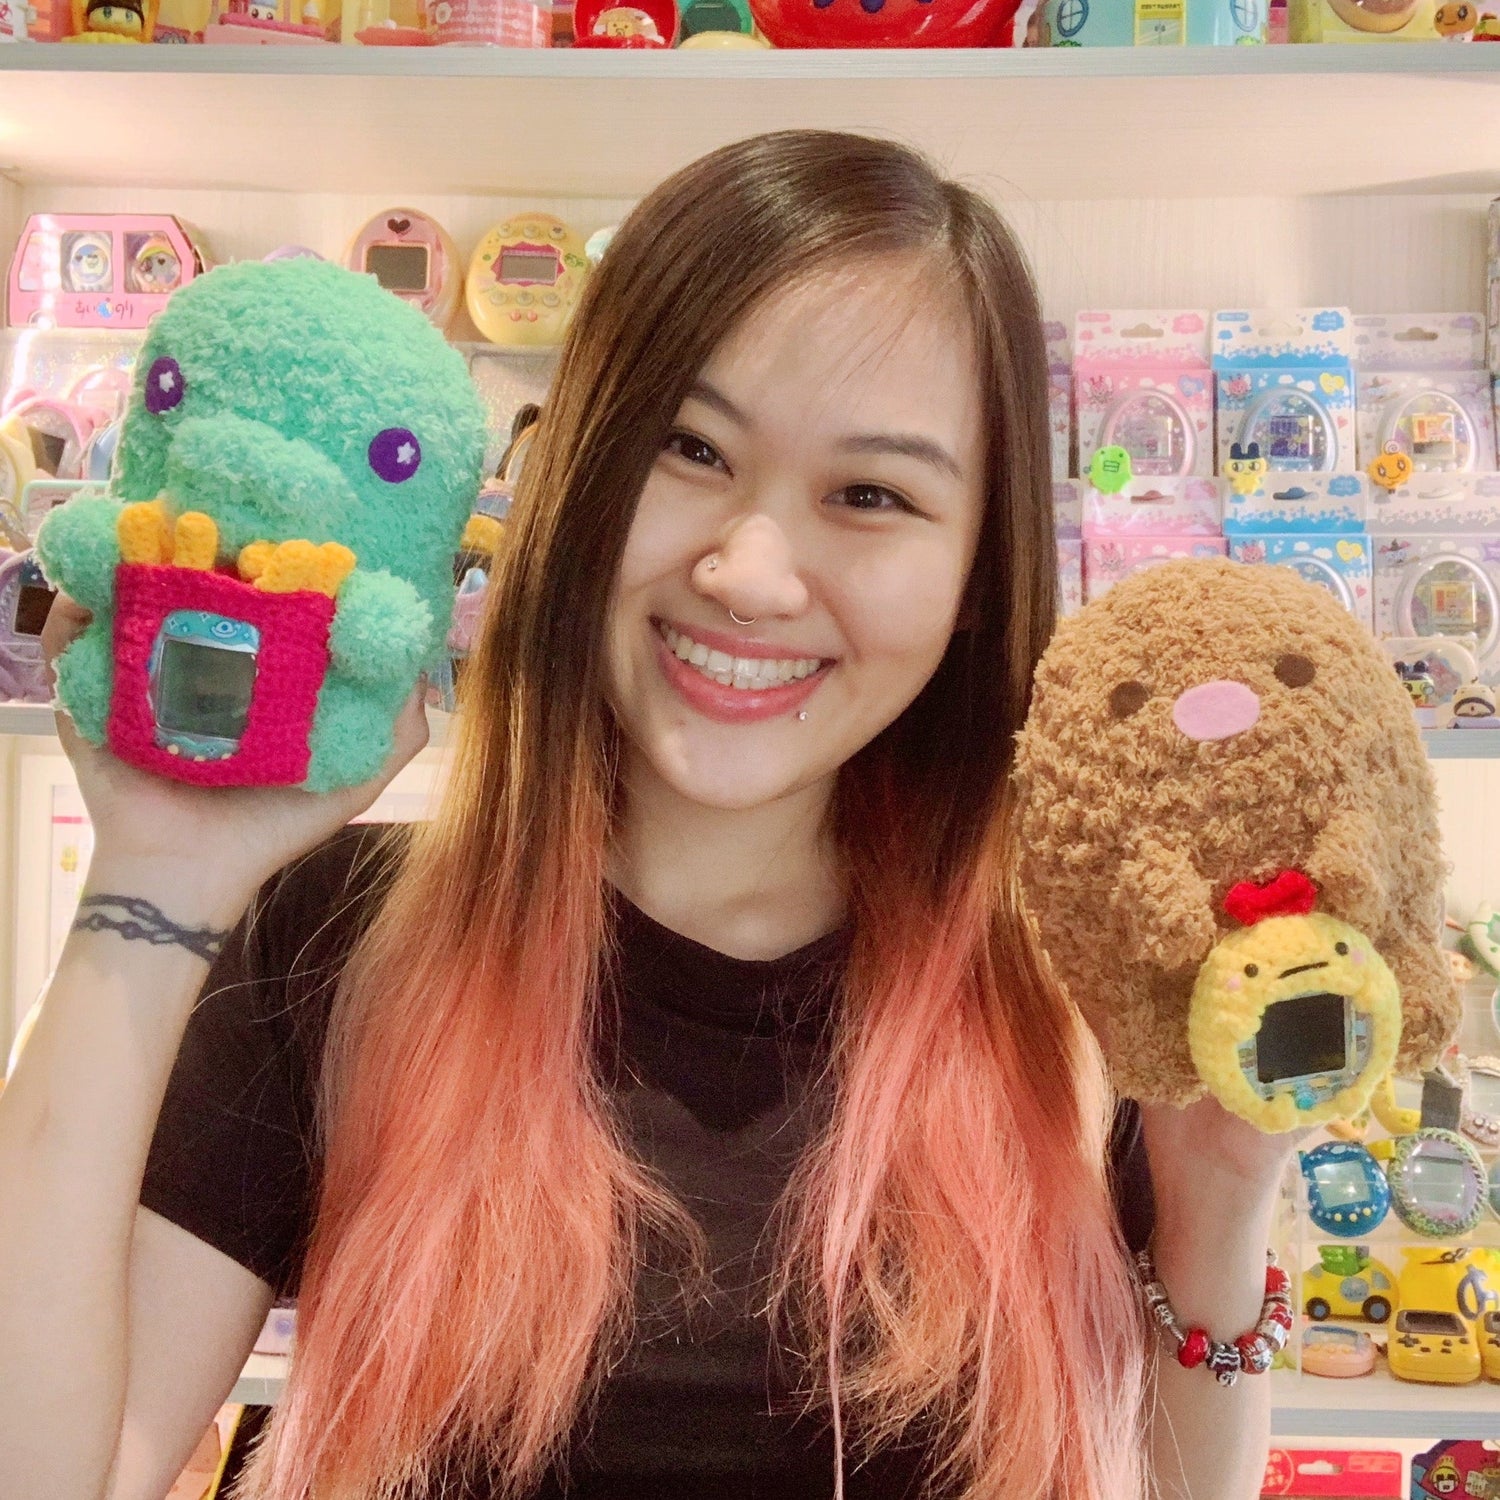 Plushies that hold Tamagotchis